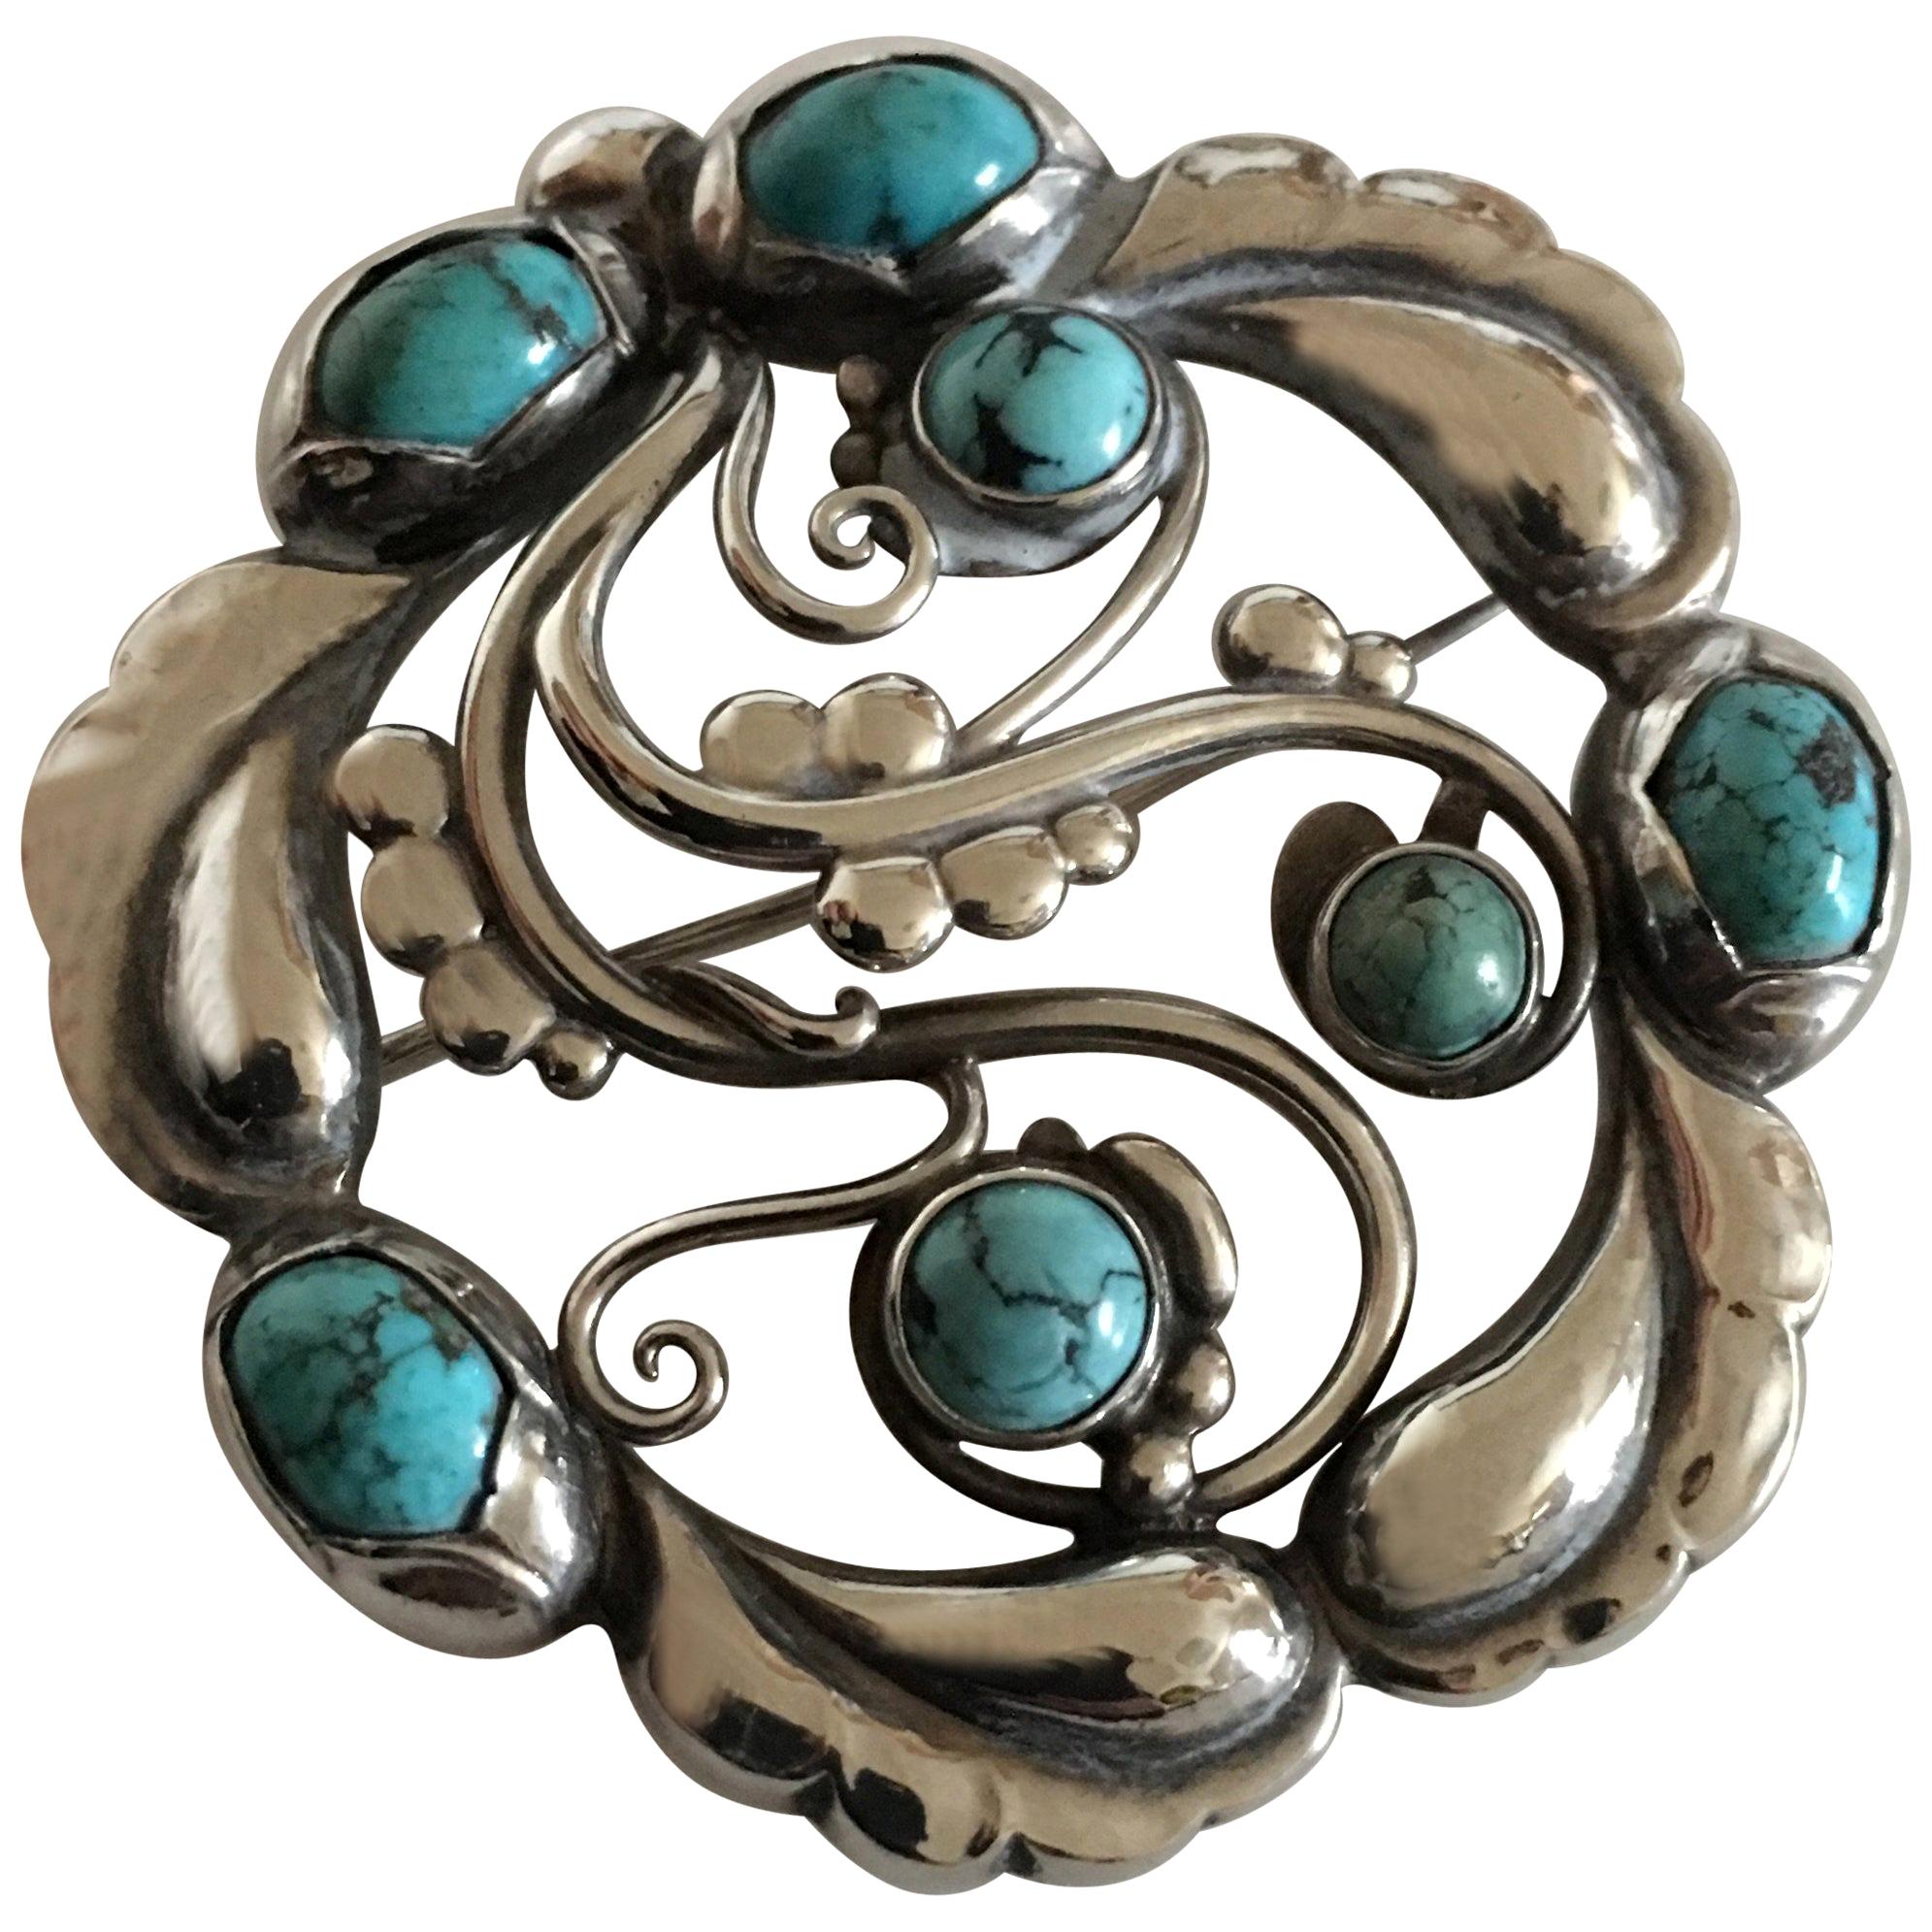 Georg Jensen Sterling Silver Brooch No. 159 Ornamented with Turquoise